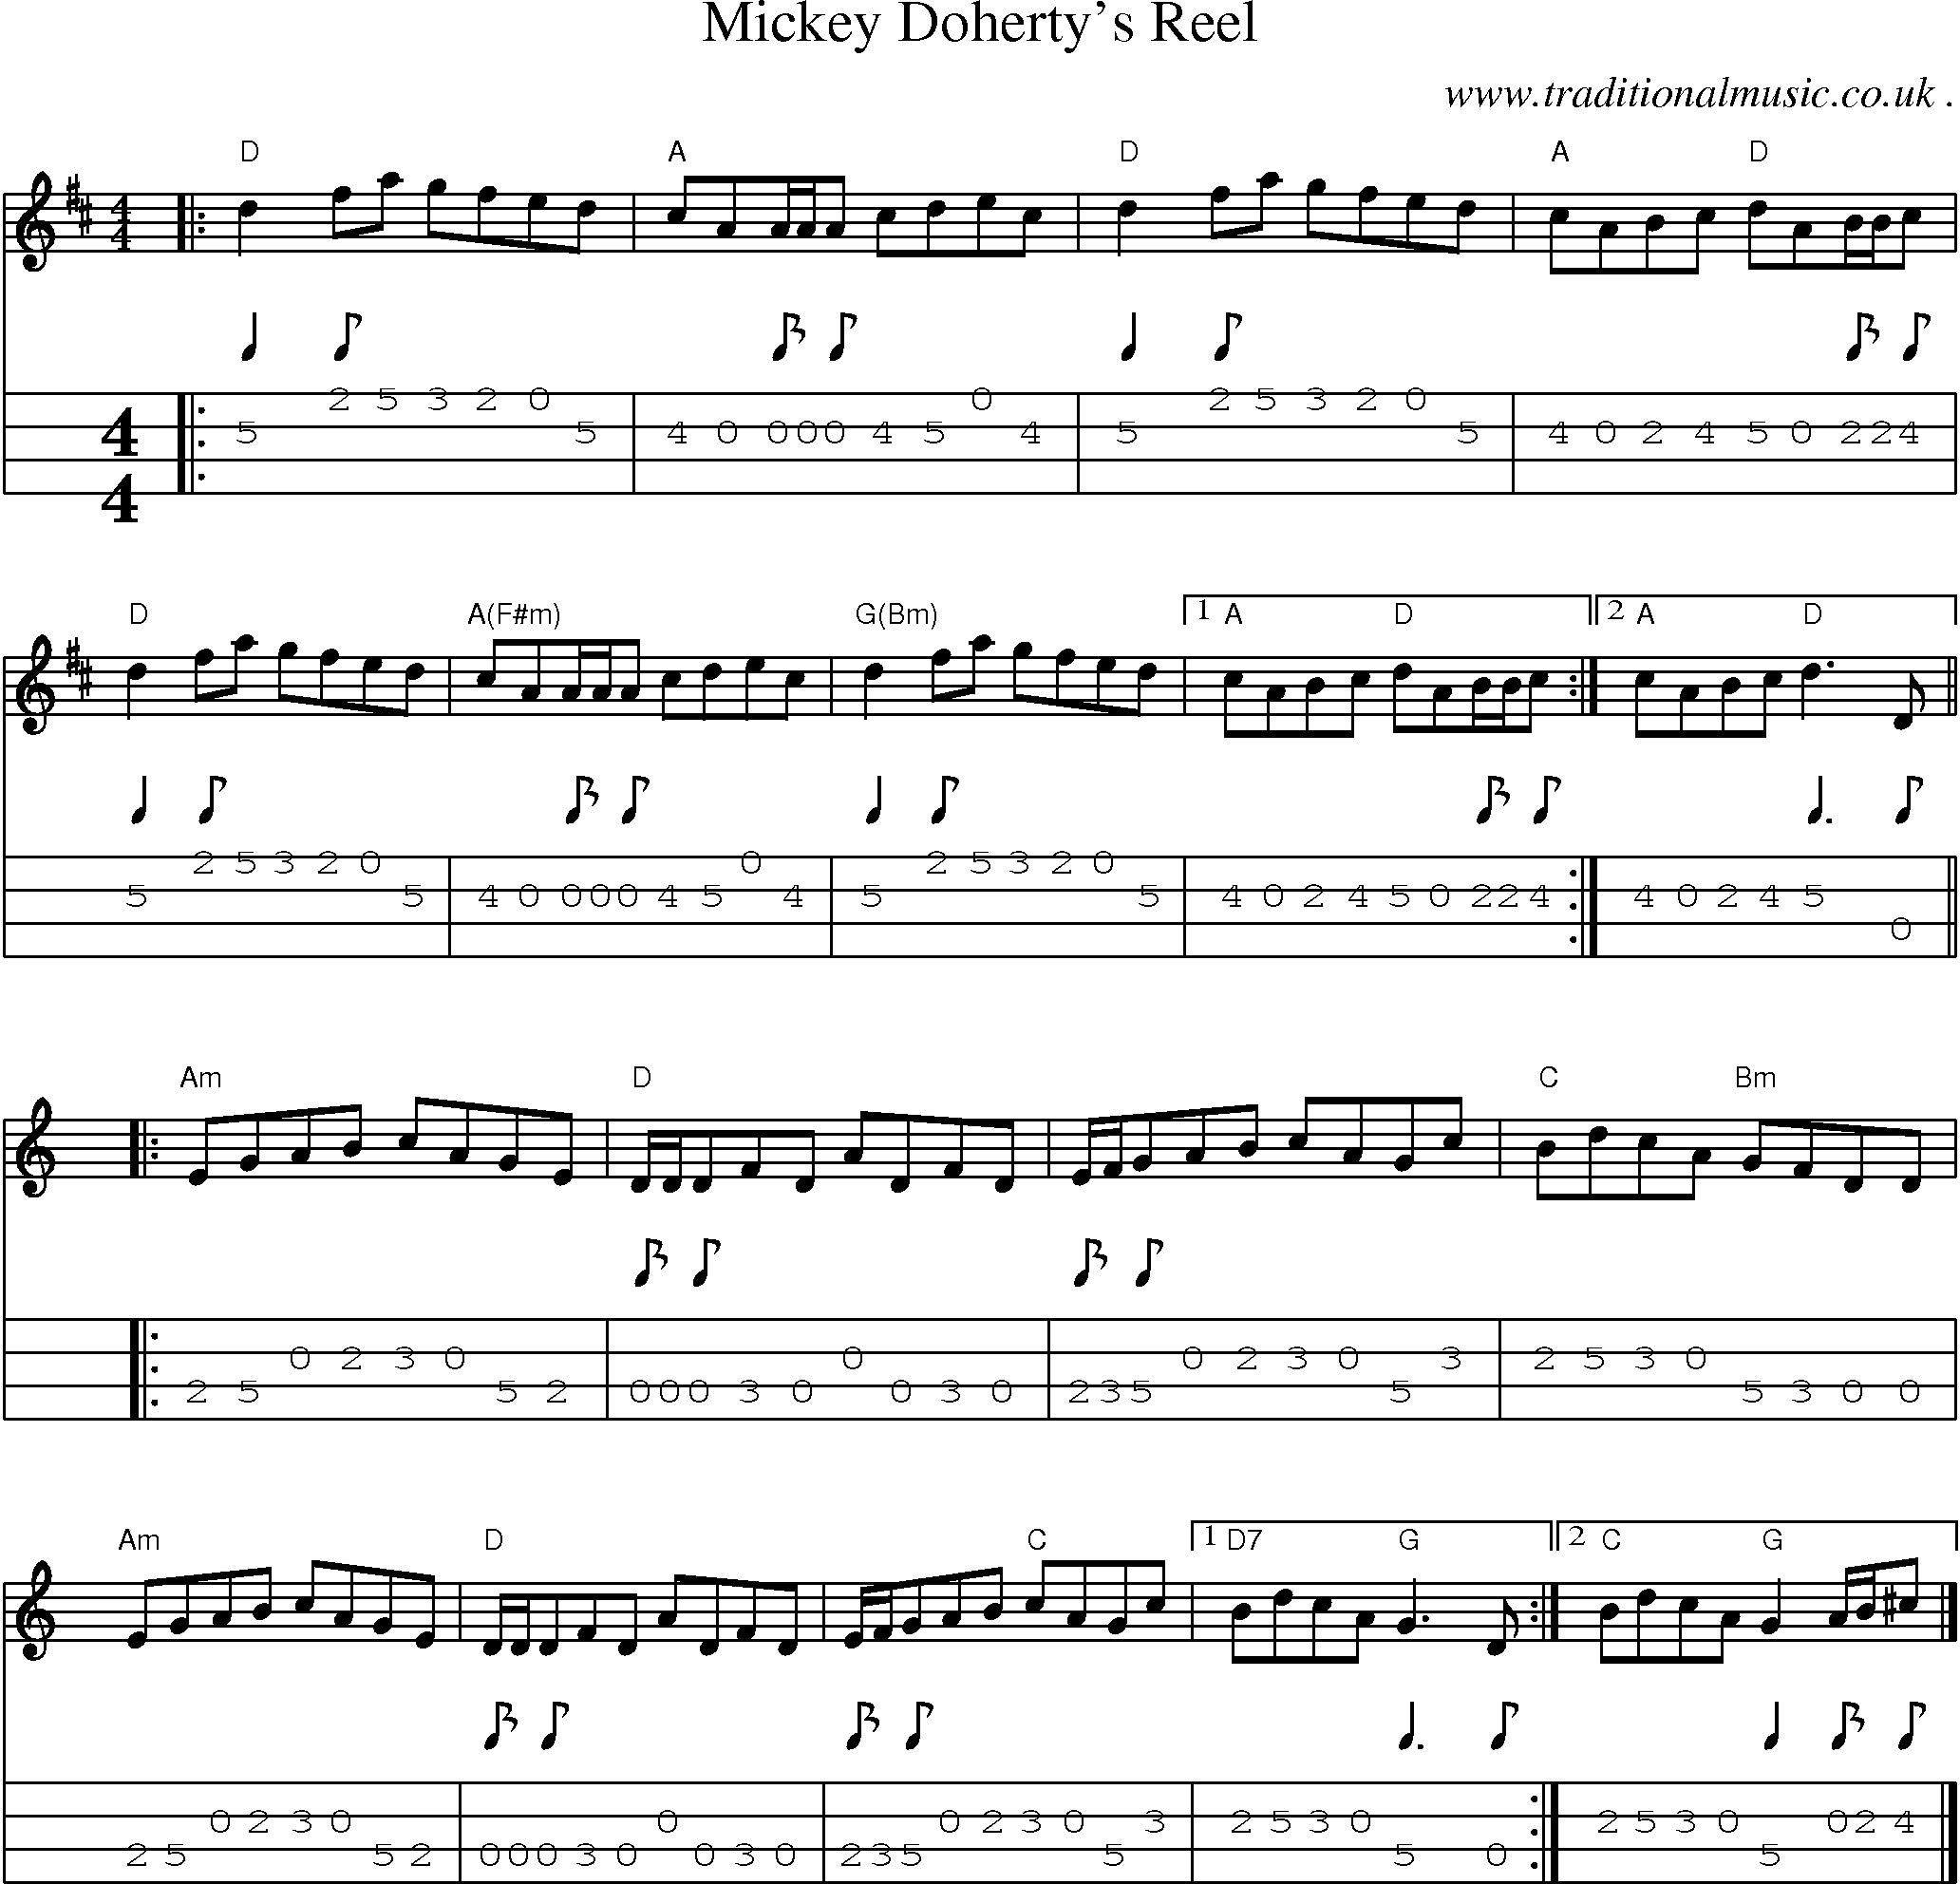 Music Score and Guitar Tabs for Mickey Dohertys Reel